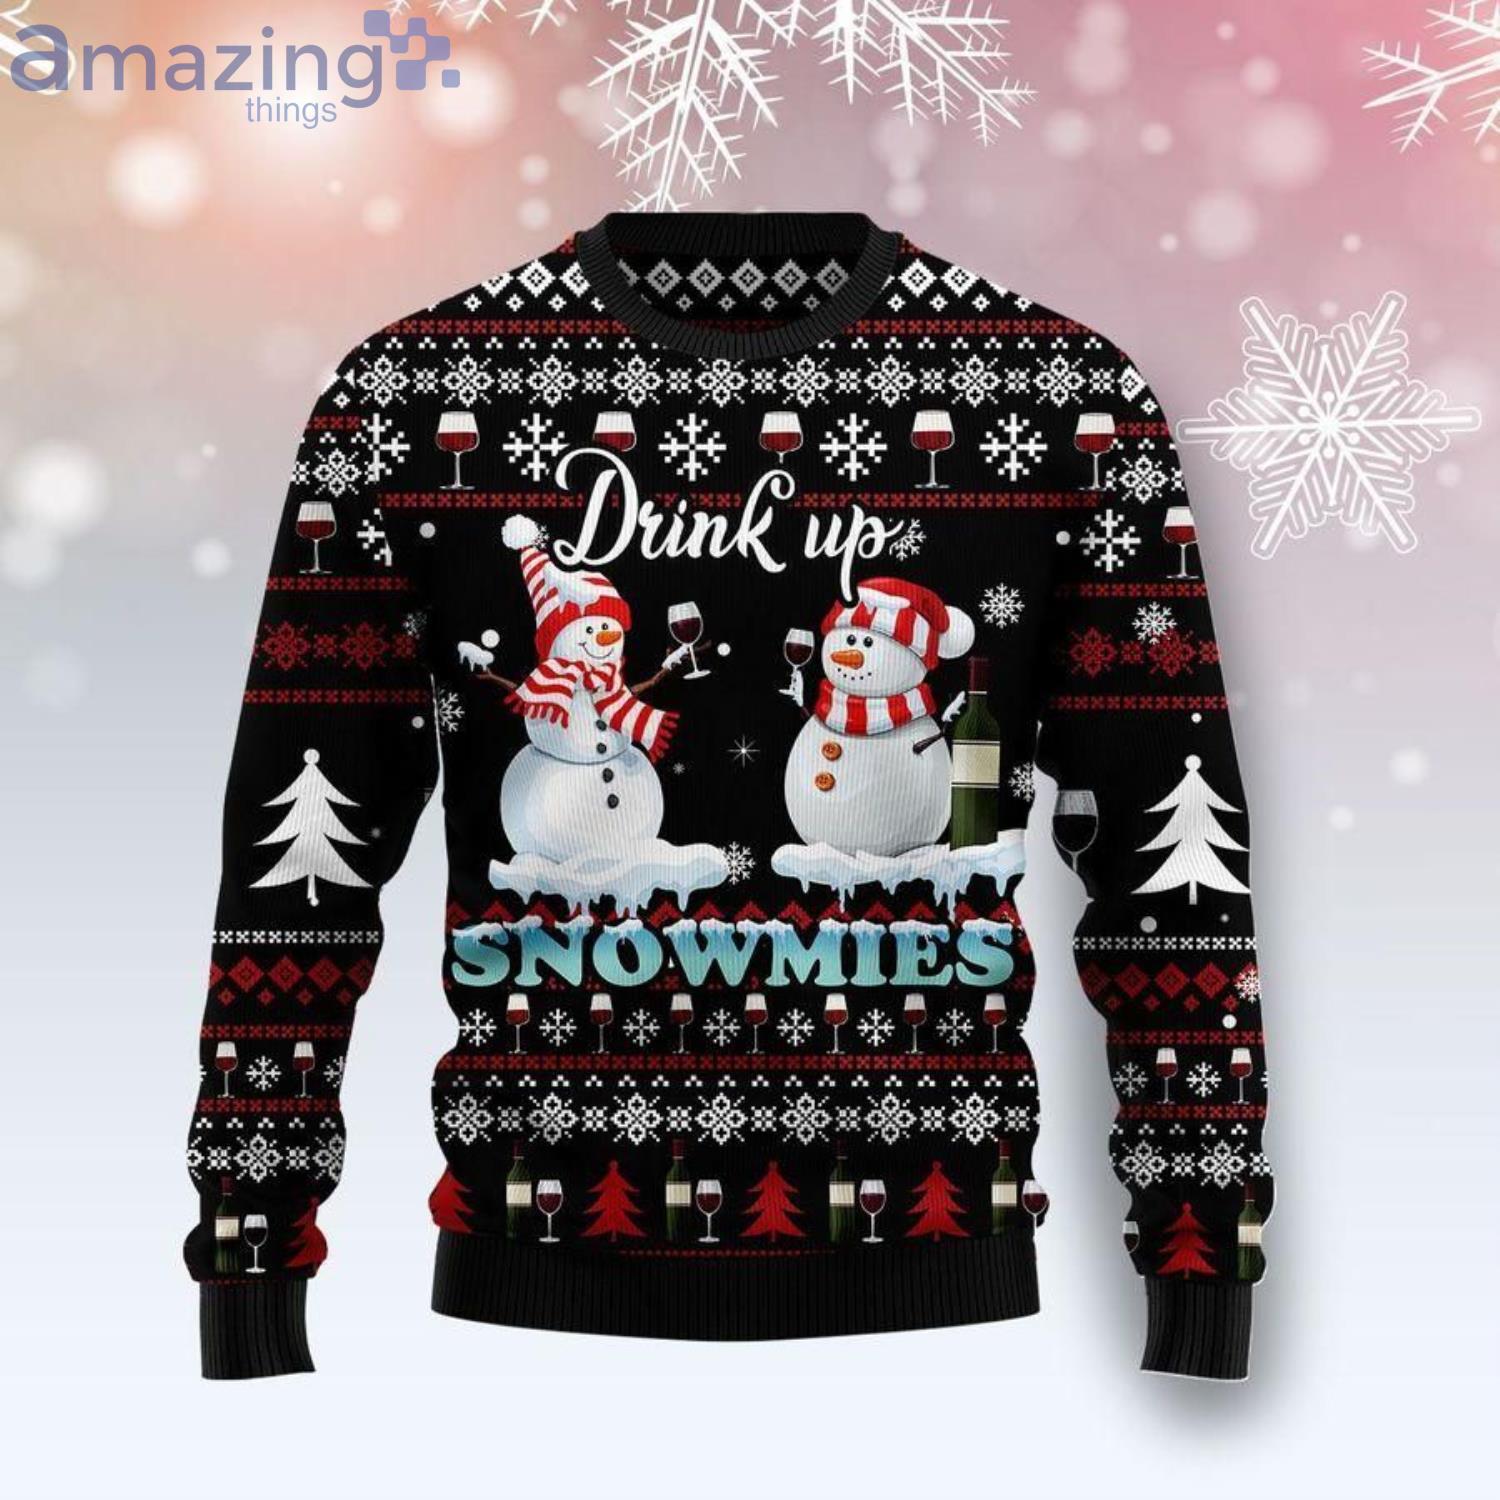 Drink Up Wine Snowmies Christmas Ugly Sweater Product Photo 1